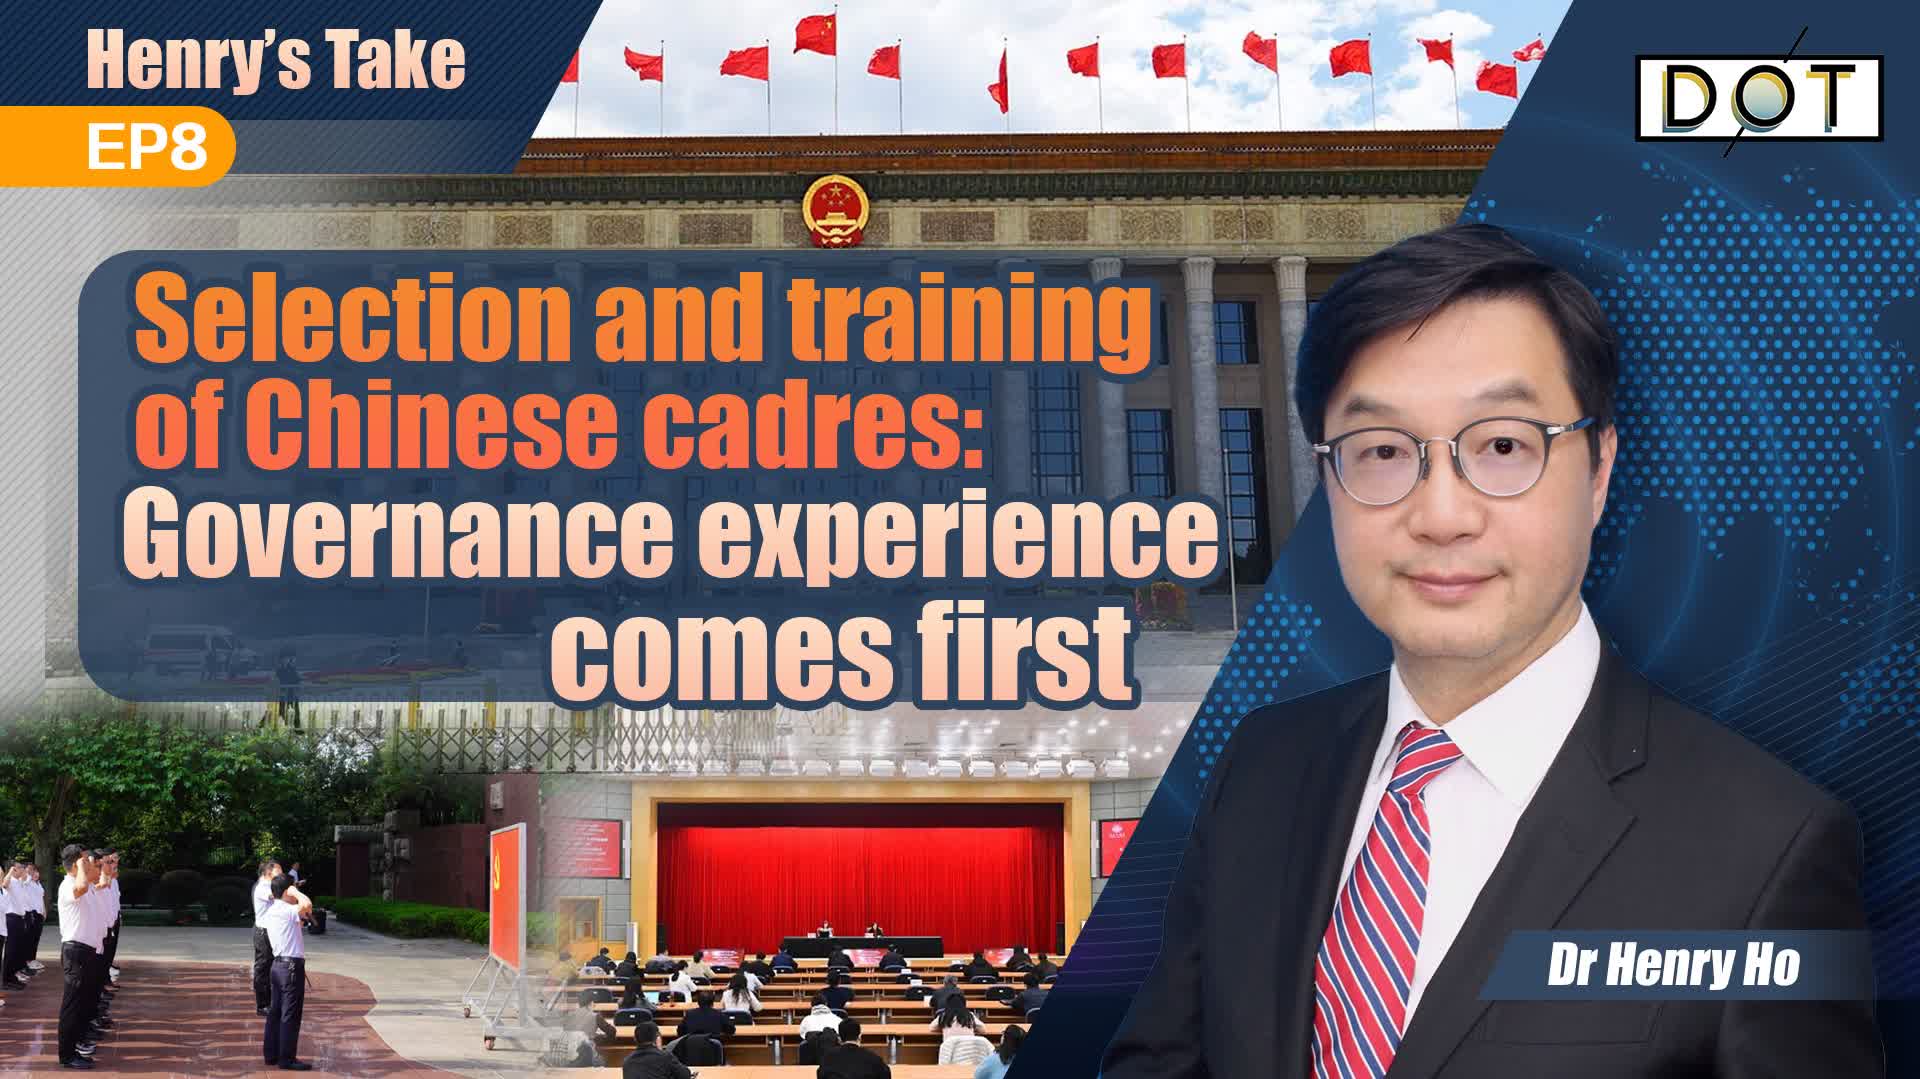 Henry's Take EP8 | Selection and training of Chinese cadres: Governance experience comes first